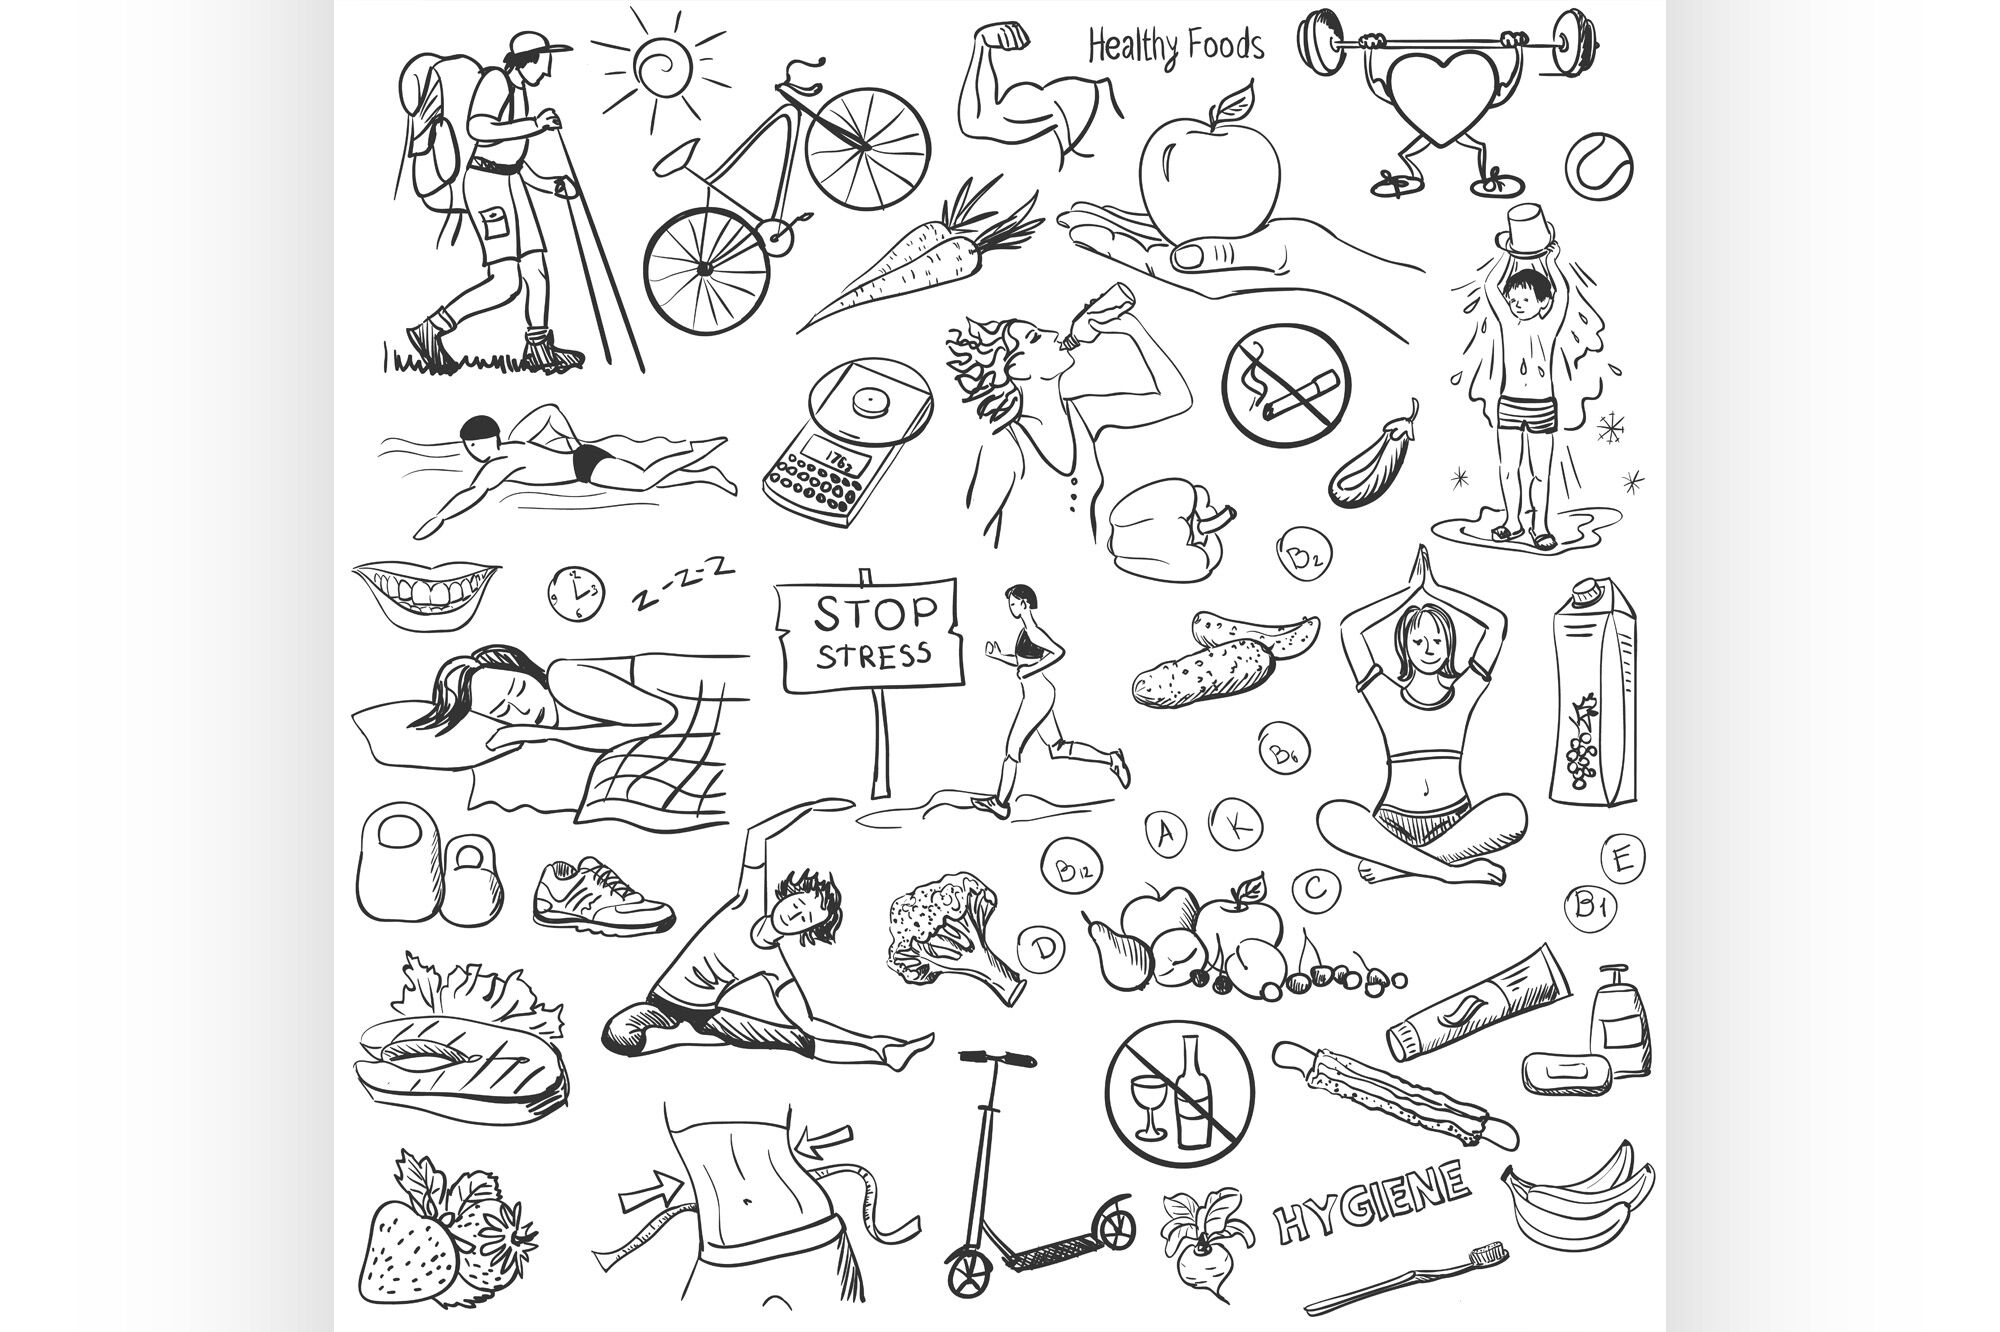 Healthy Lifestyle Chart With Keywords And Sketch Icons Stock Photo, Picture  and Royalty Free Image. Image 59878463.